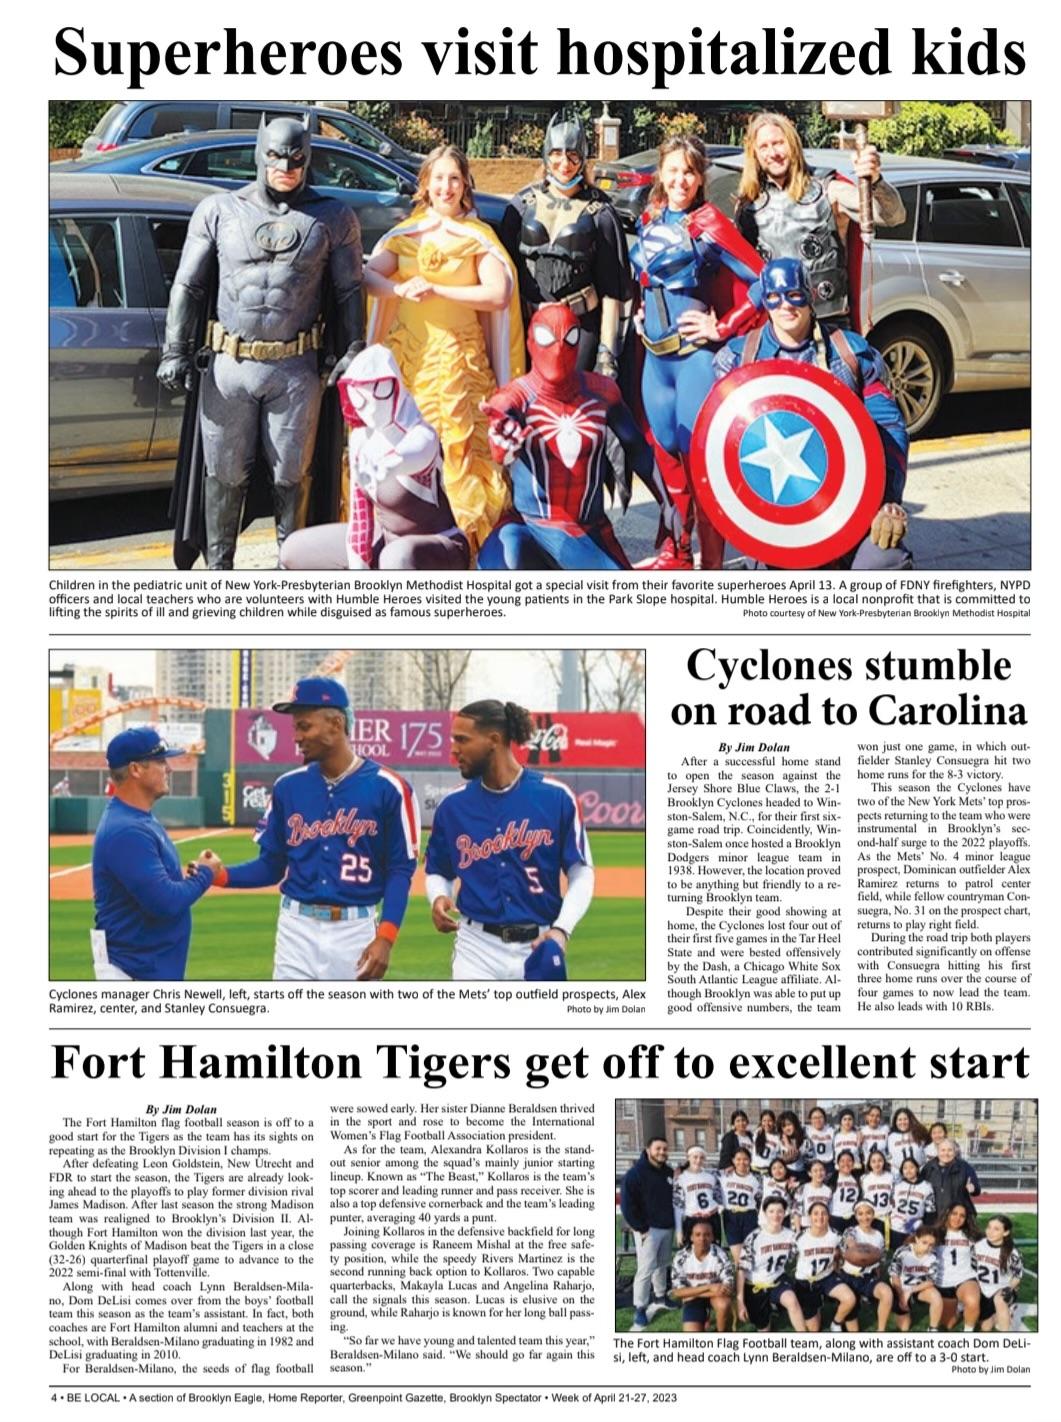 FHHS Flag Football team article from the Brooklyn reporter 